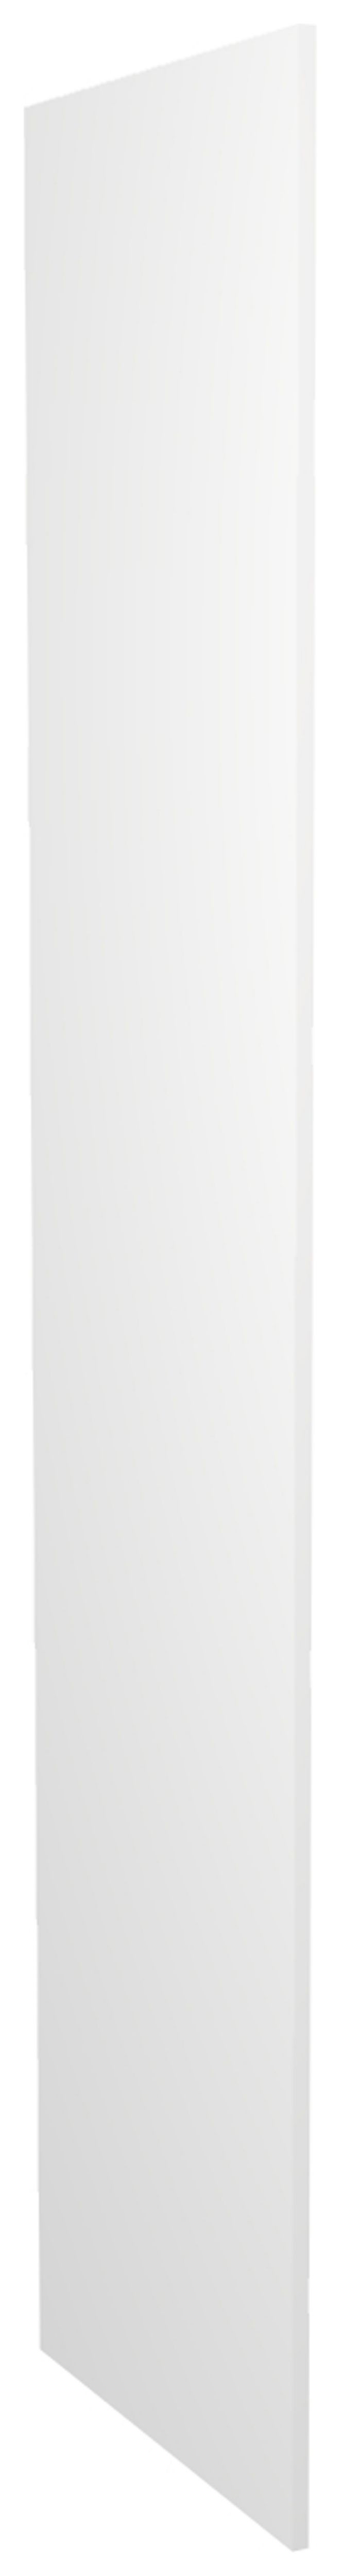 Wickes Vienna Gloss White Tower Decor End Panel - 18mm